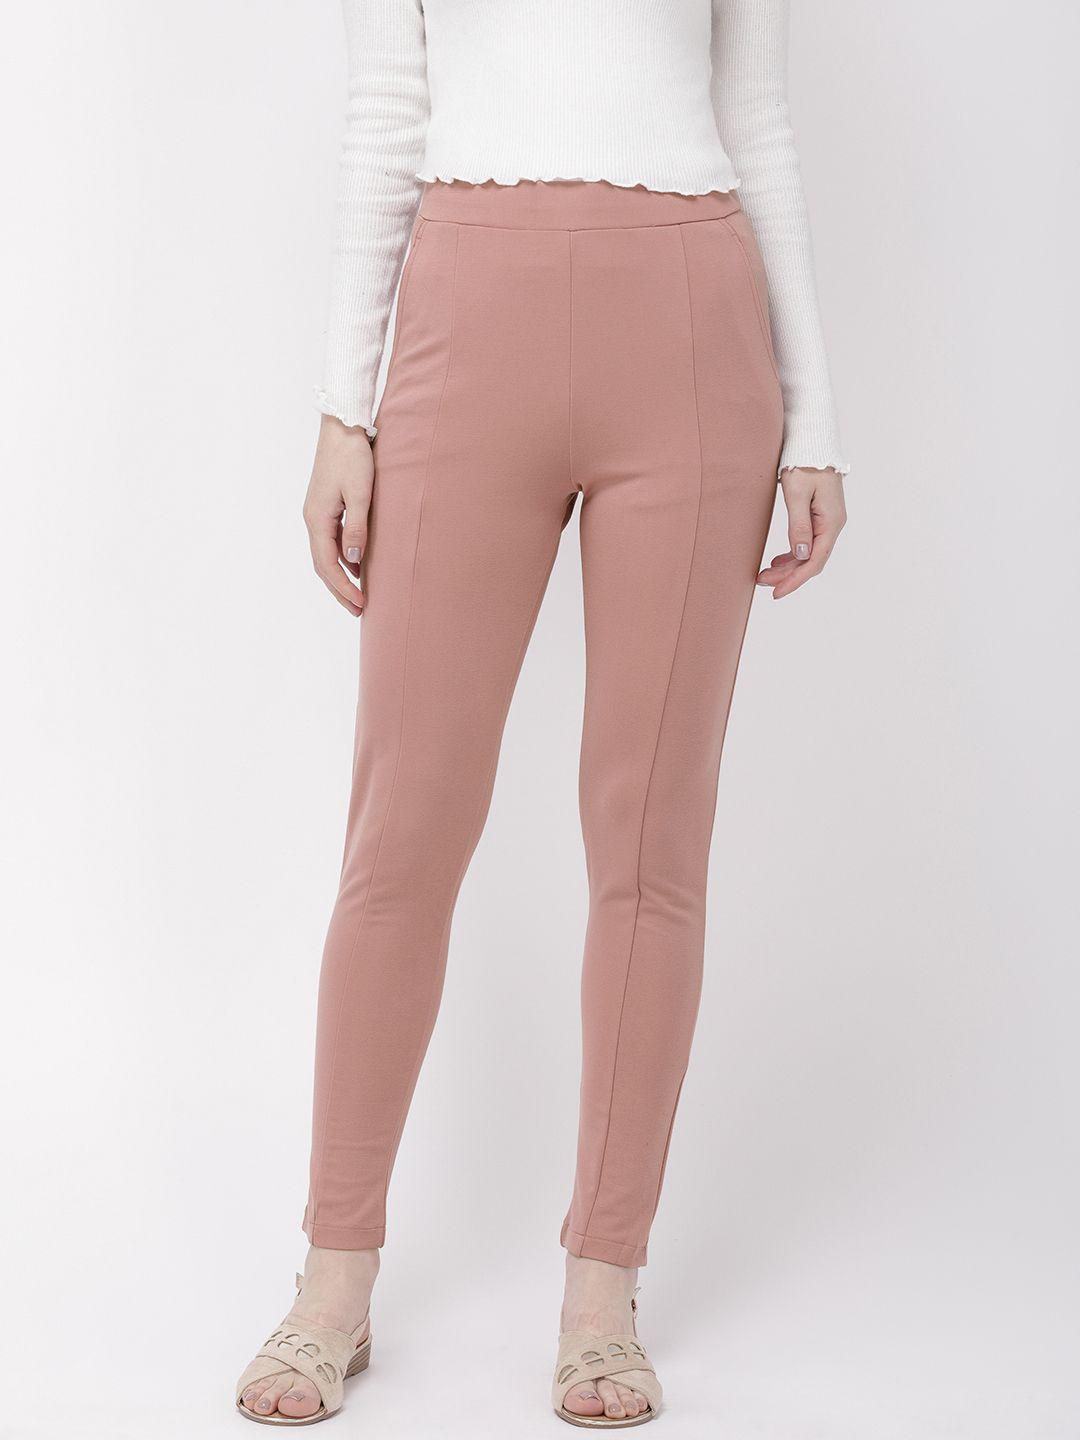 go-colors-women-pink-solid-treggings